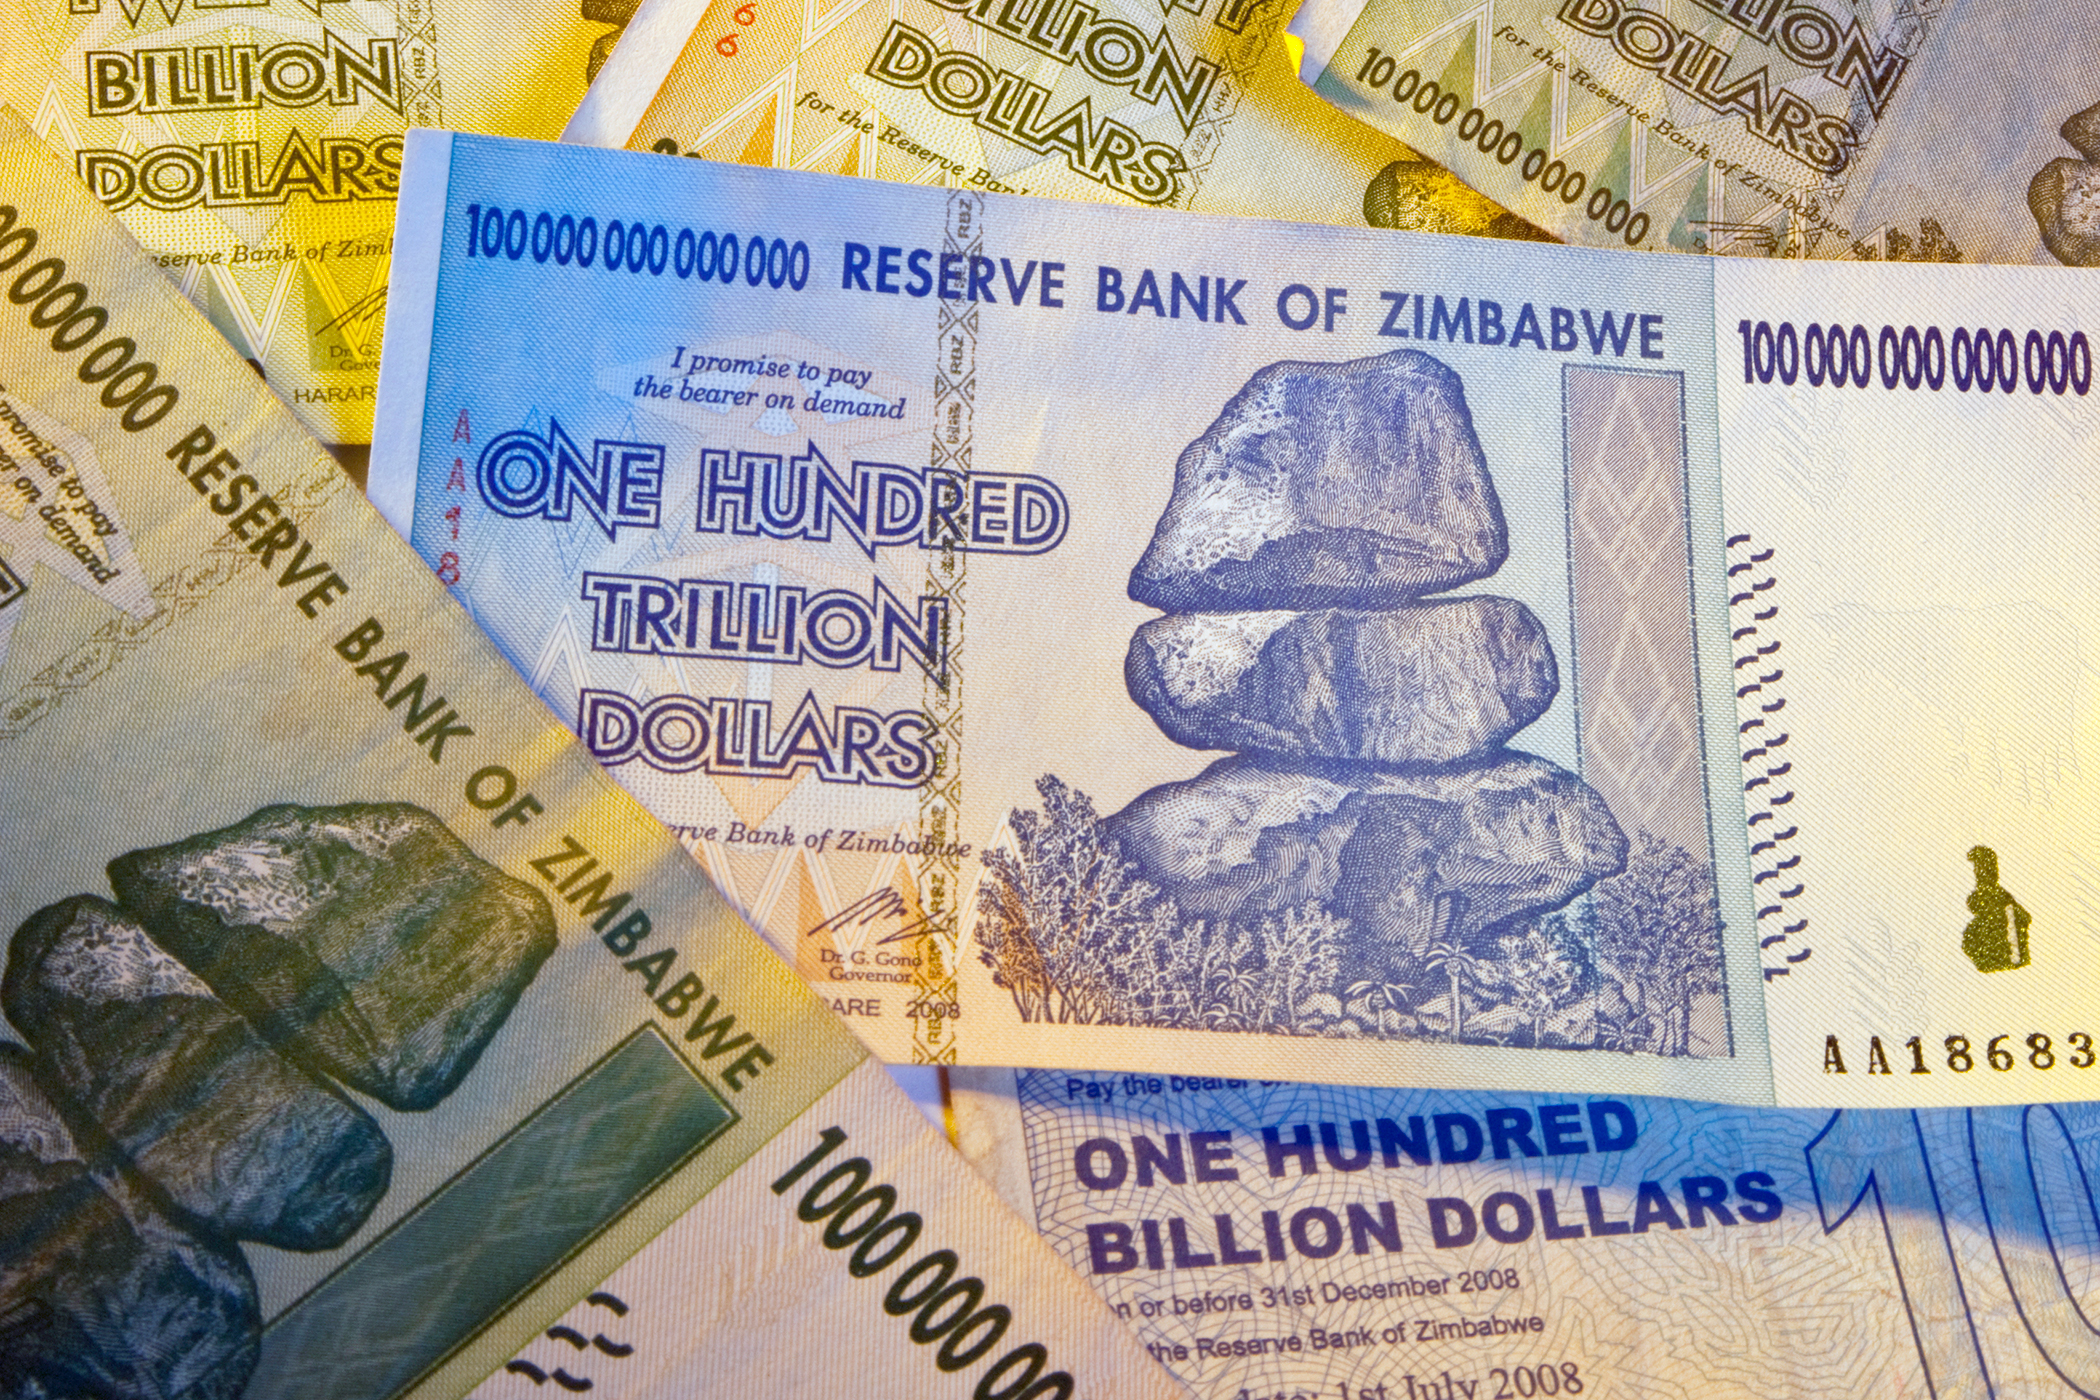 One Hundred Trillion Dollar banknote from Reserve Bank of Zimbabwe